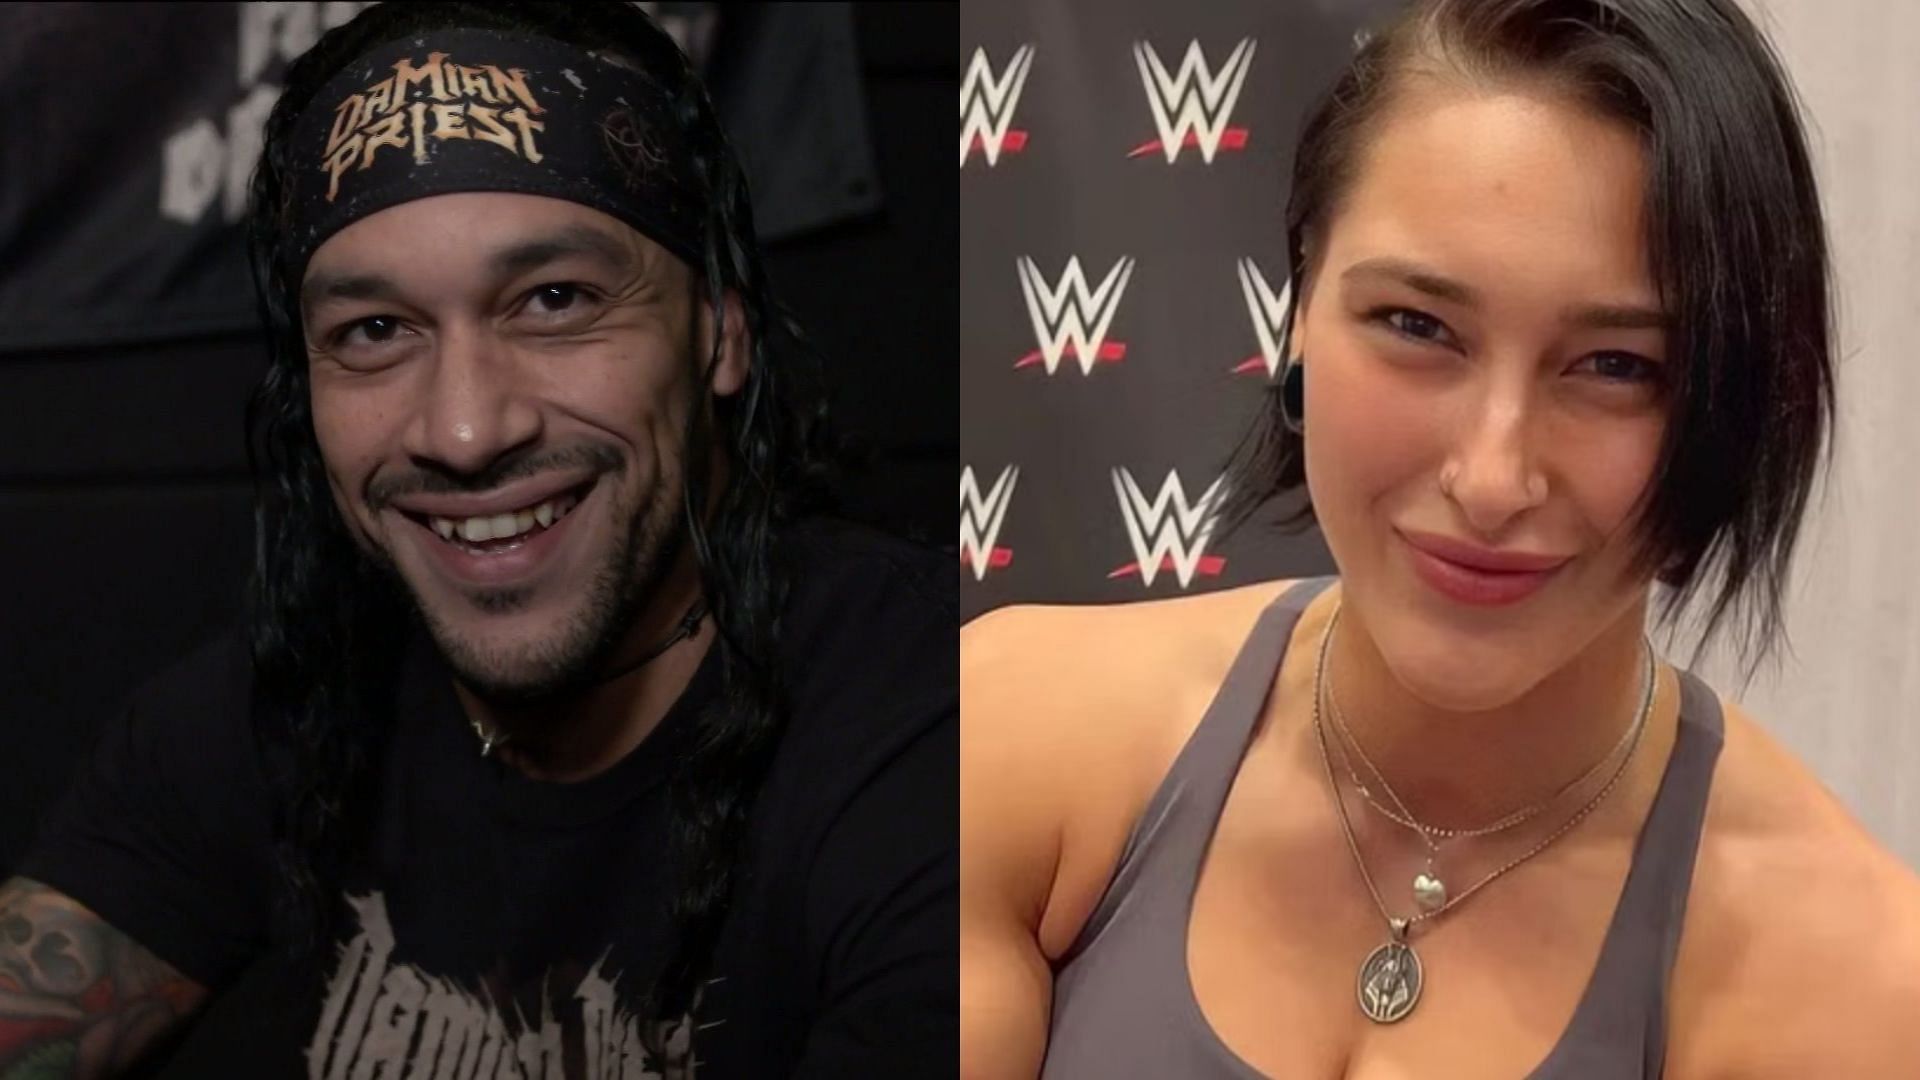 Damian Priest and Rhea Ripley are both a part of The Judgment Day faction.